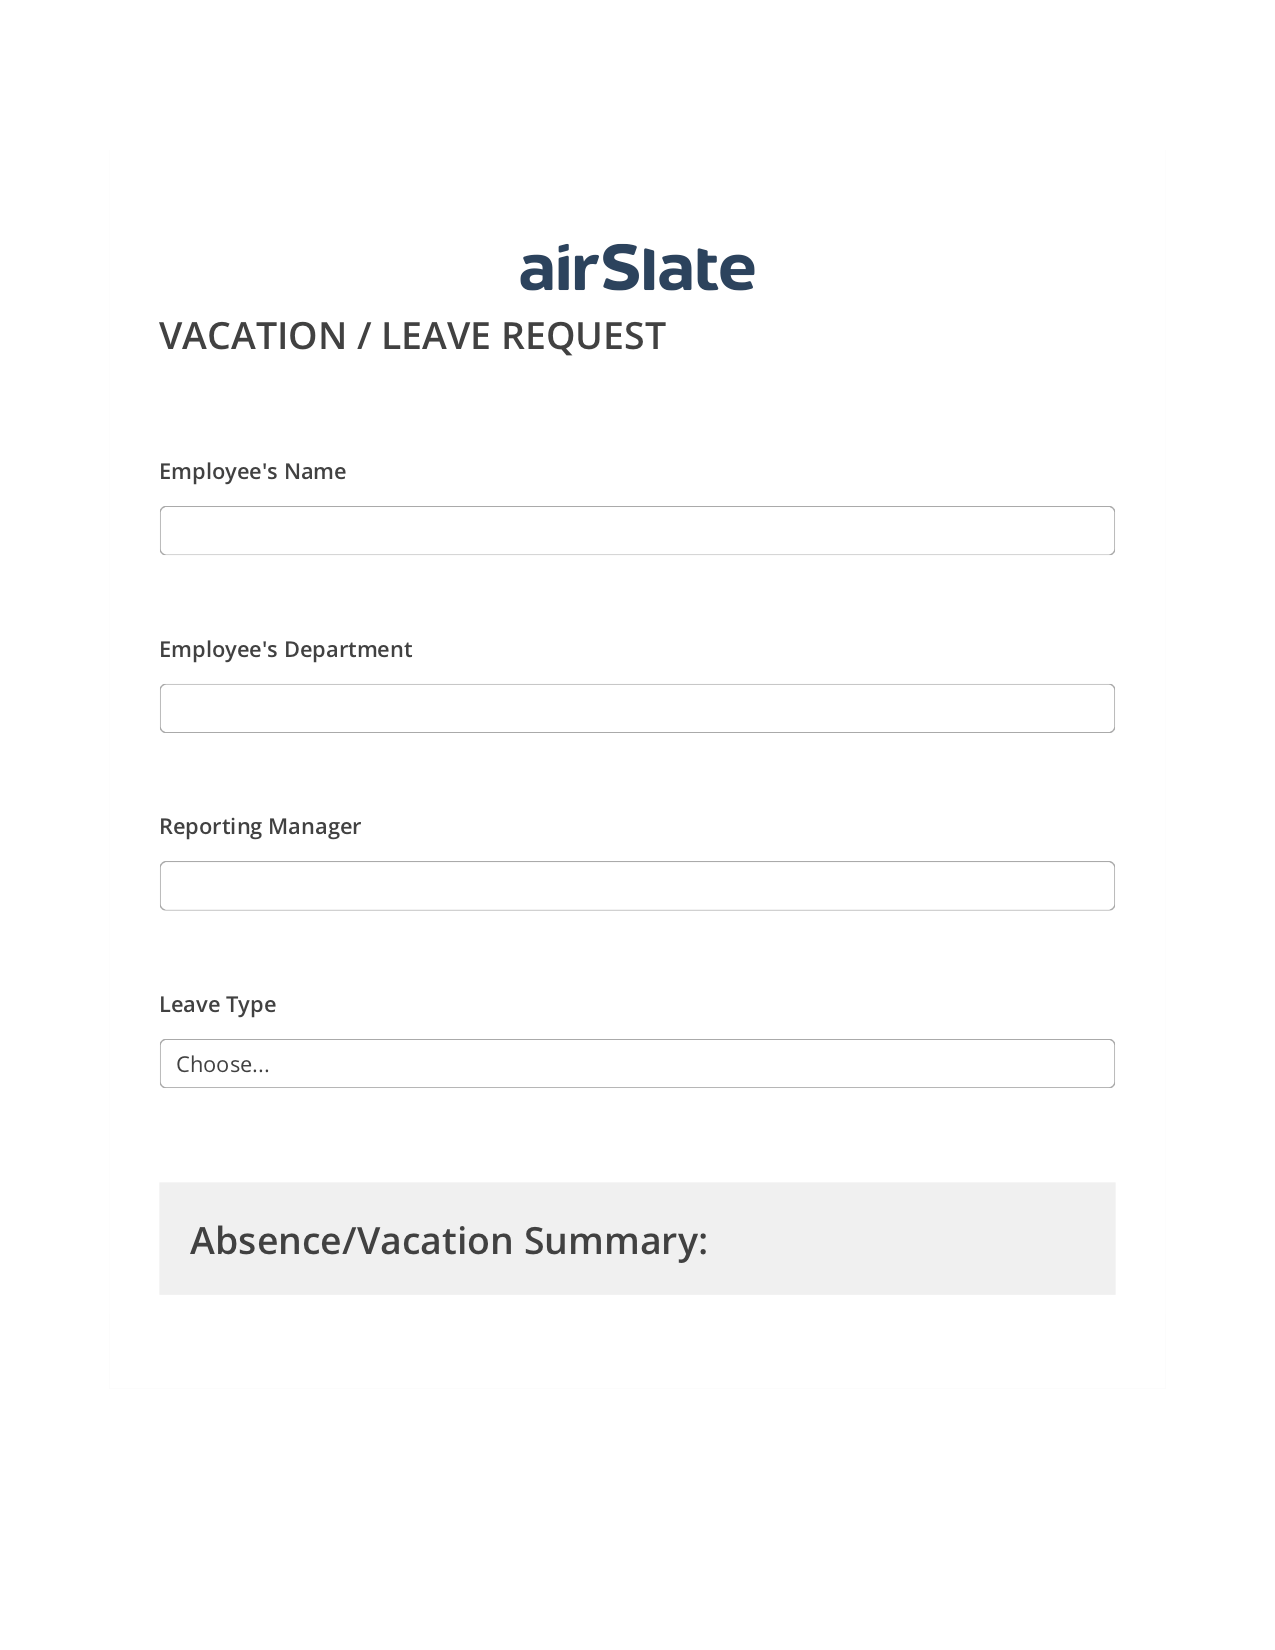 Multirole Vacation/Leave Request Workflow System Bot - Slack Two-Way Binding Bot, Remove Slate Bot, Archive to Google Drive Bot